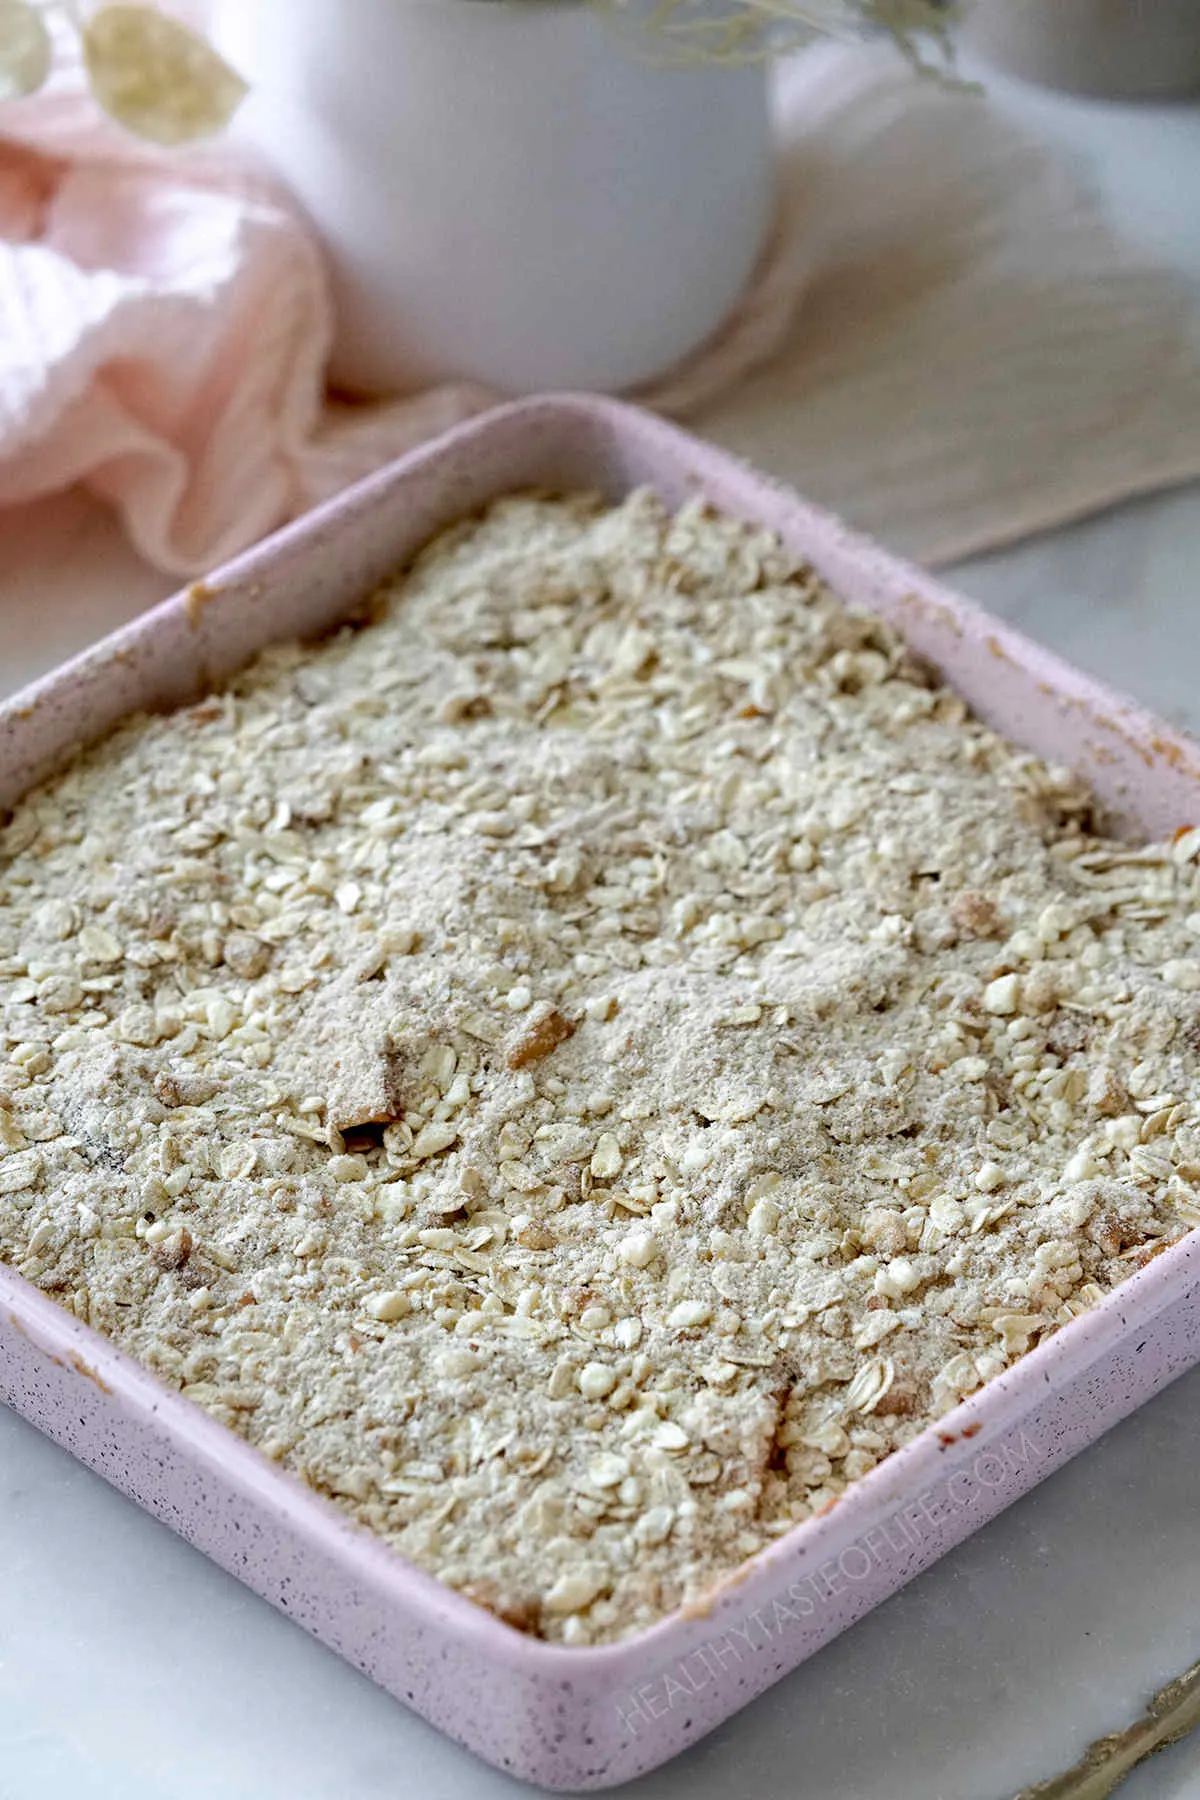 Oat crumble topping used for crisps and crumble recipes.  Just sprinkle this oat topping on any crumble.